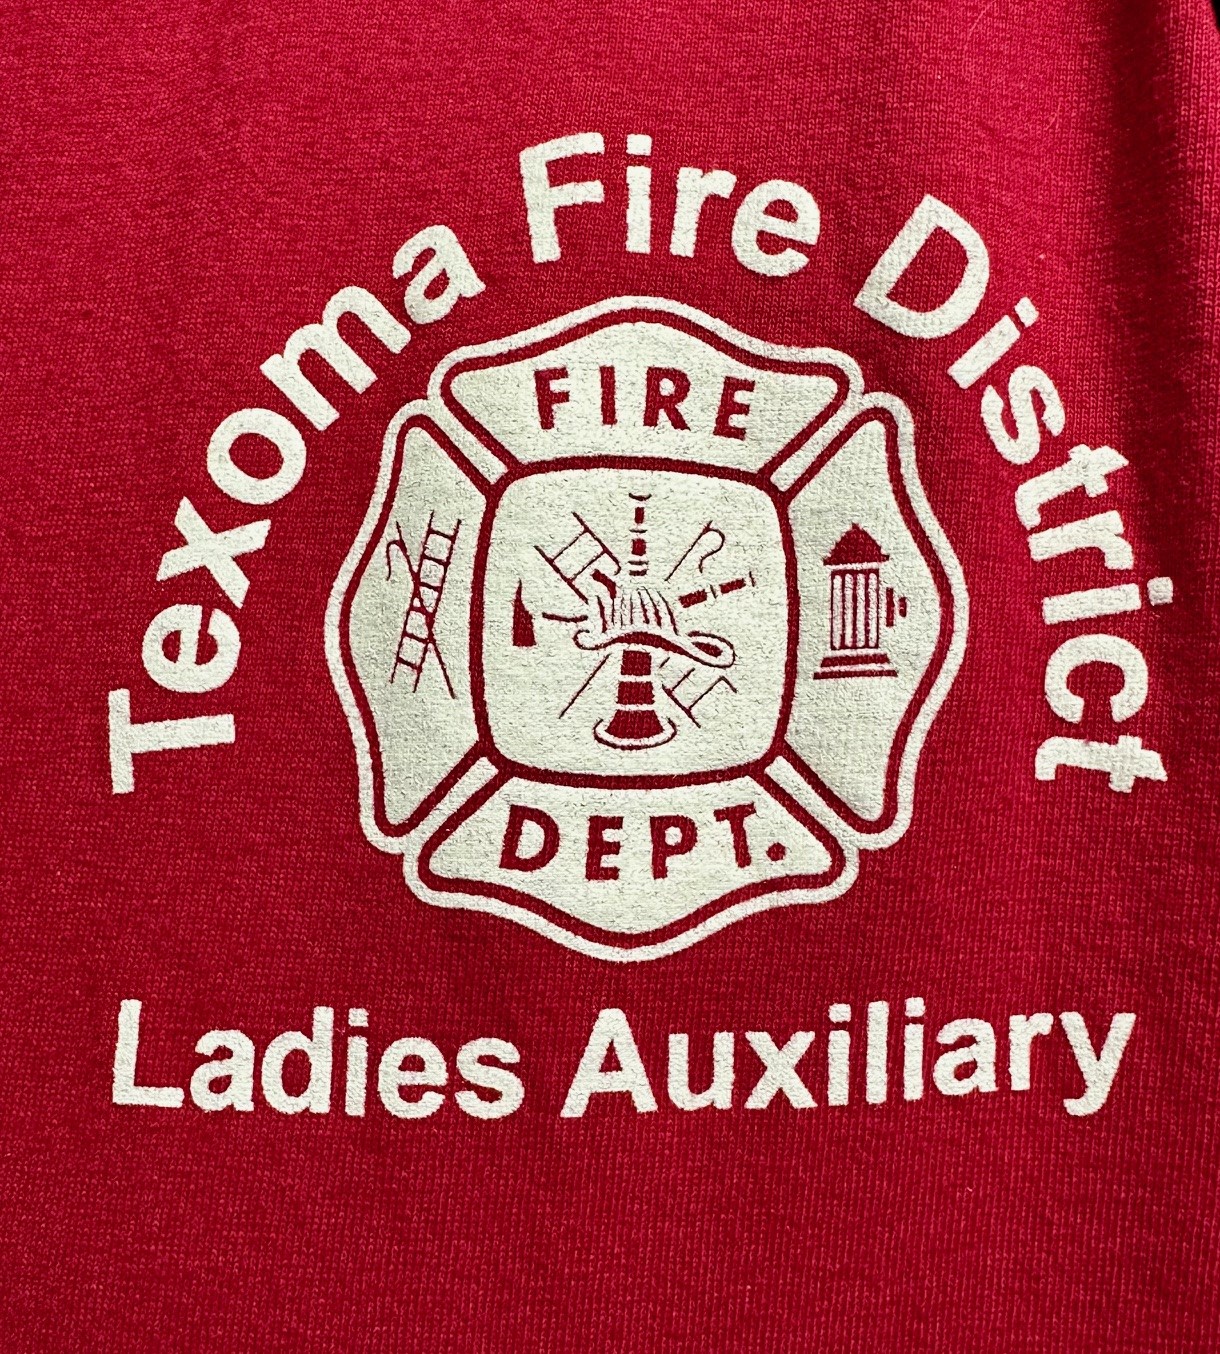 Texoma Fire District Inc, Auxiliary